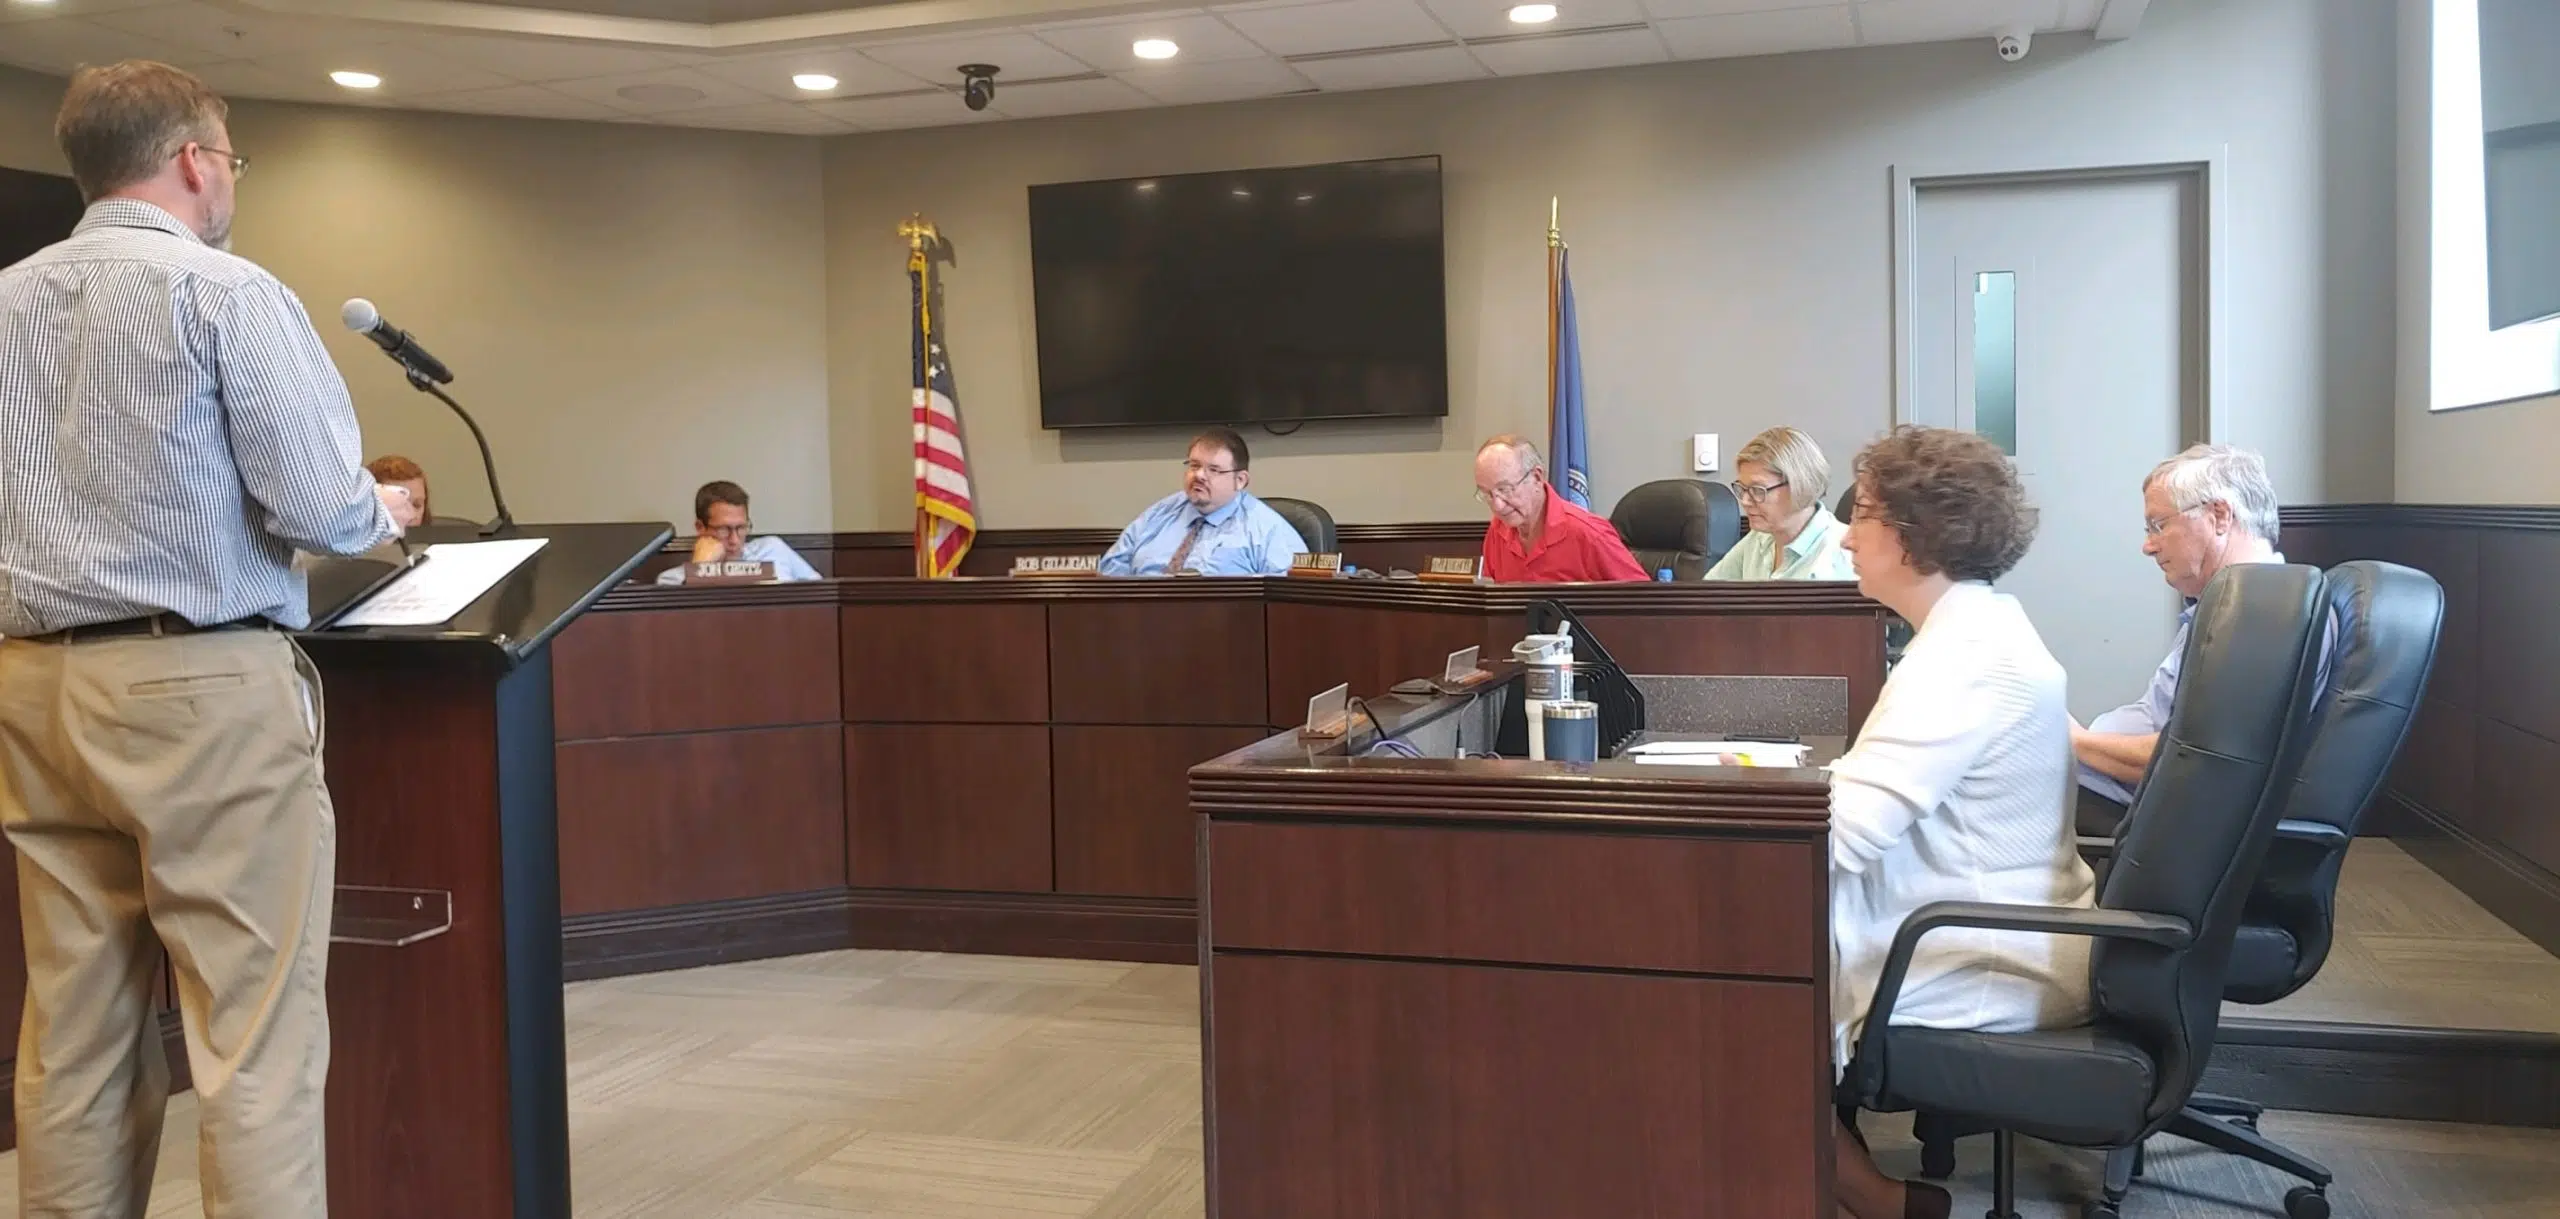 City Commission currently pondering future wage increase